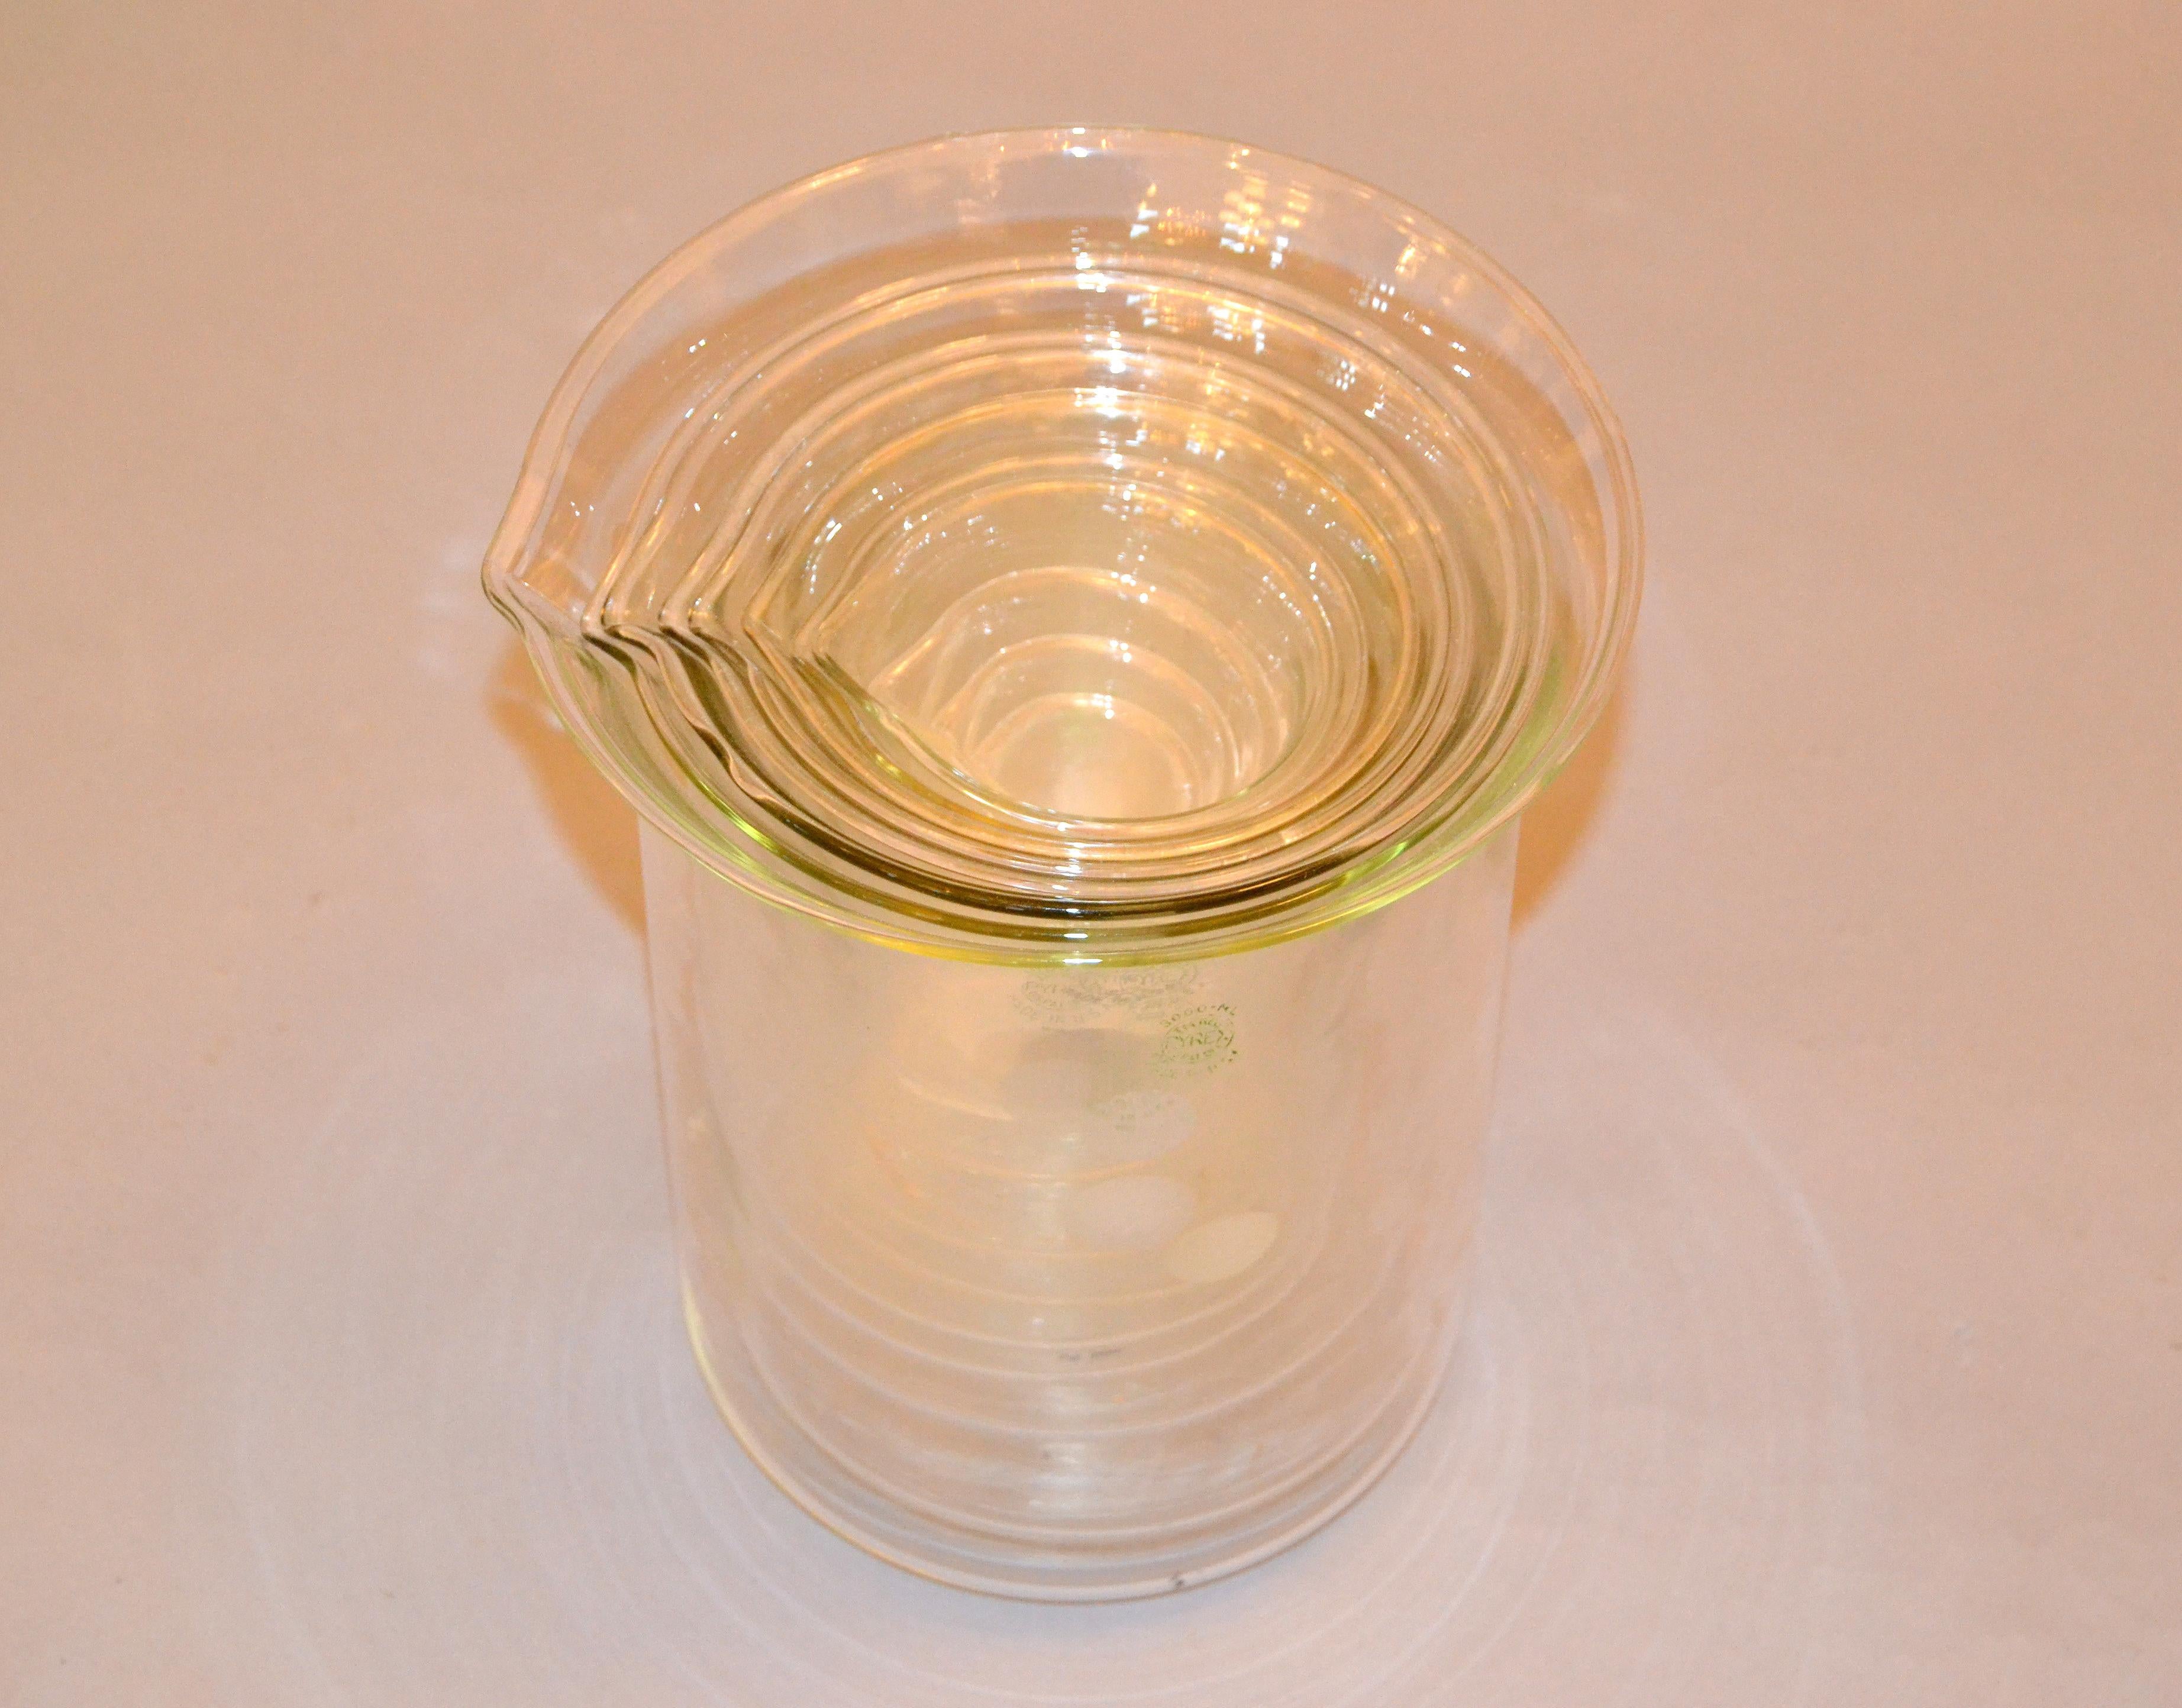 nesting glass measuring cups